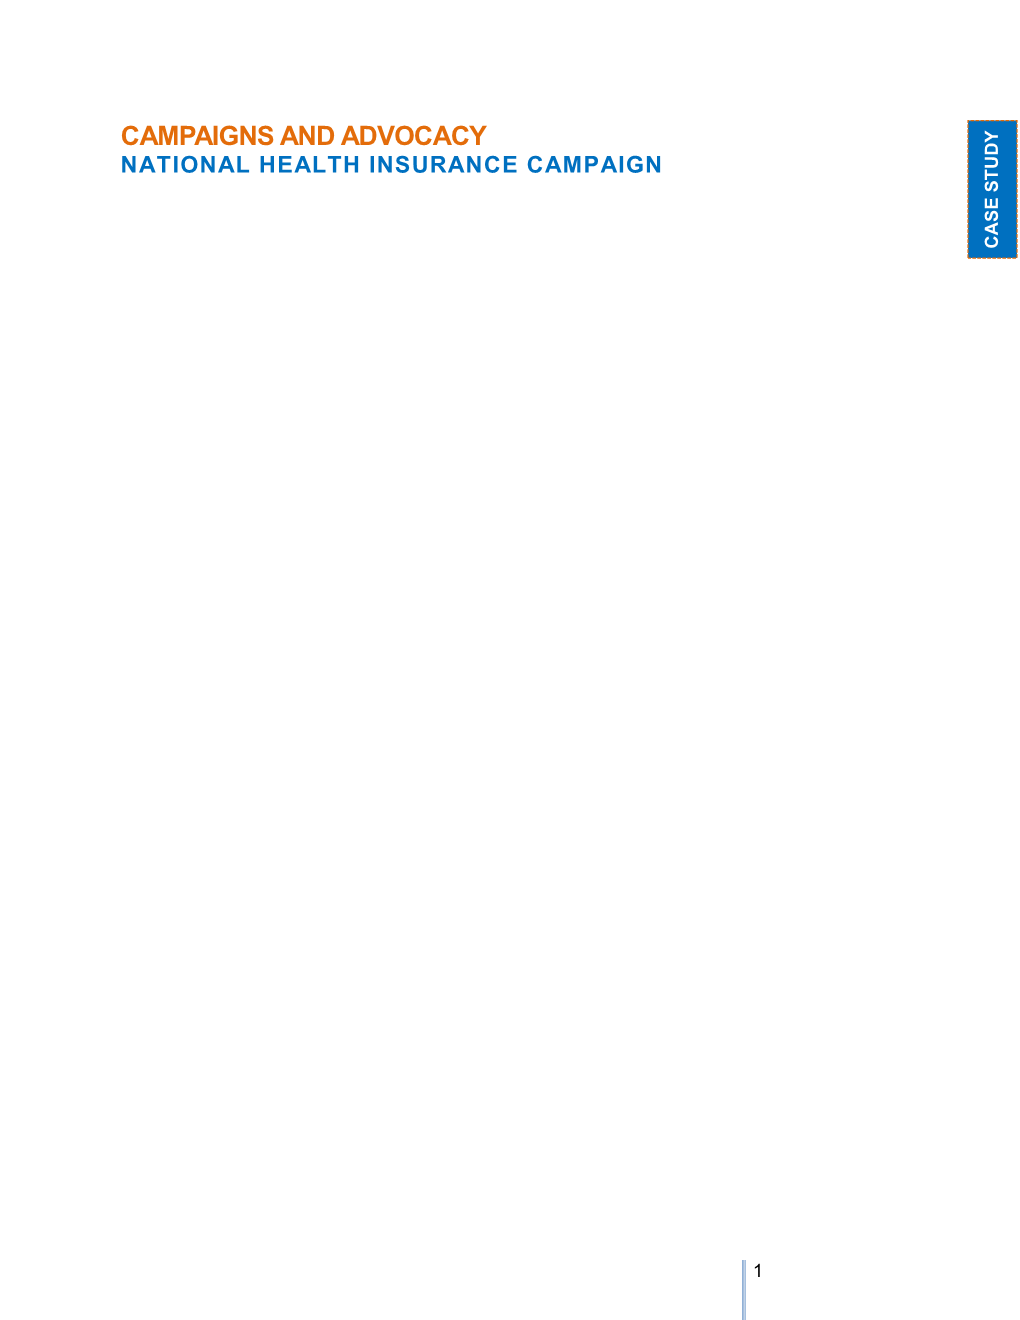 Campaigns and Advocacy National Health Insurance Campaign